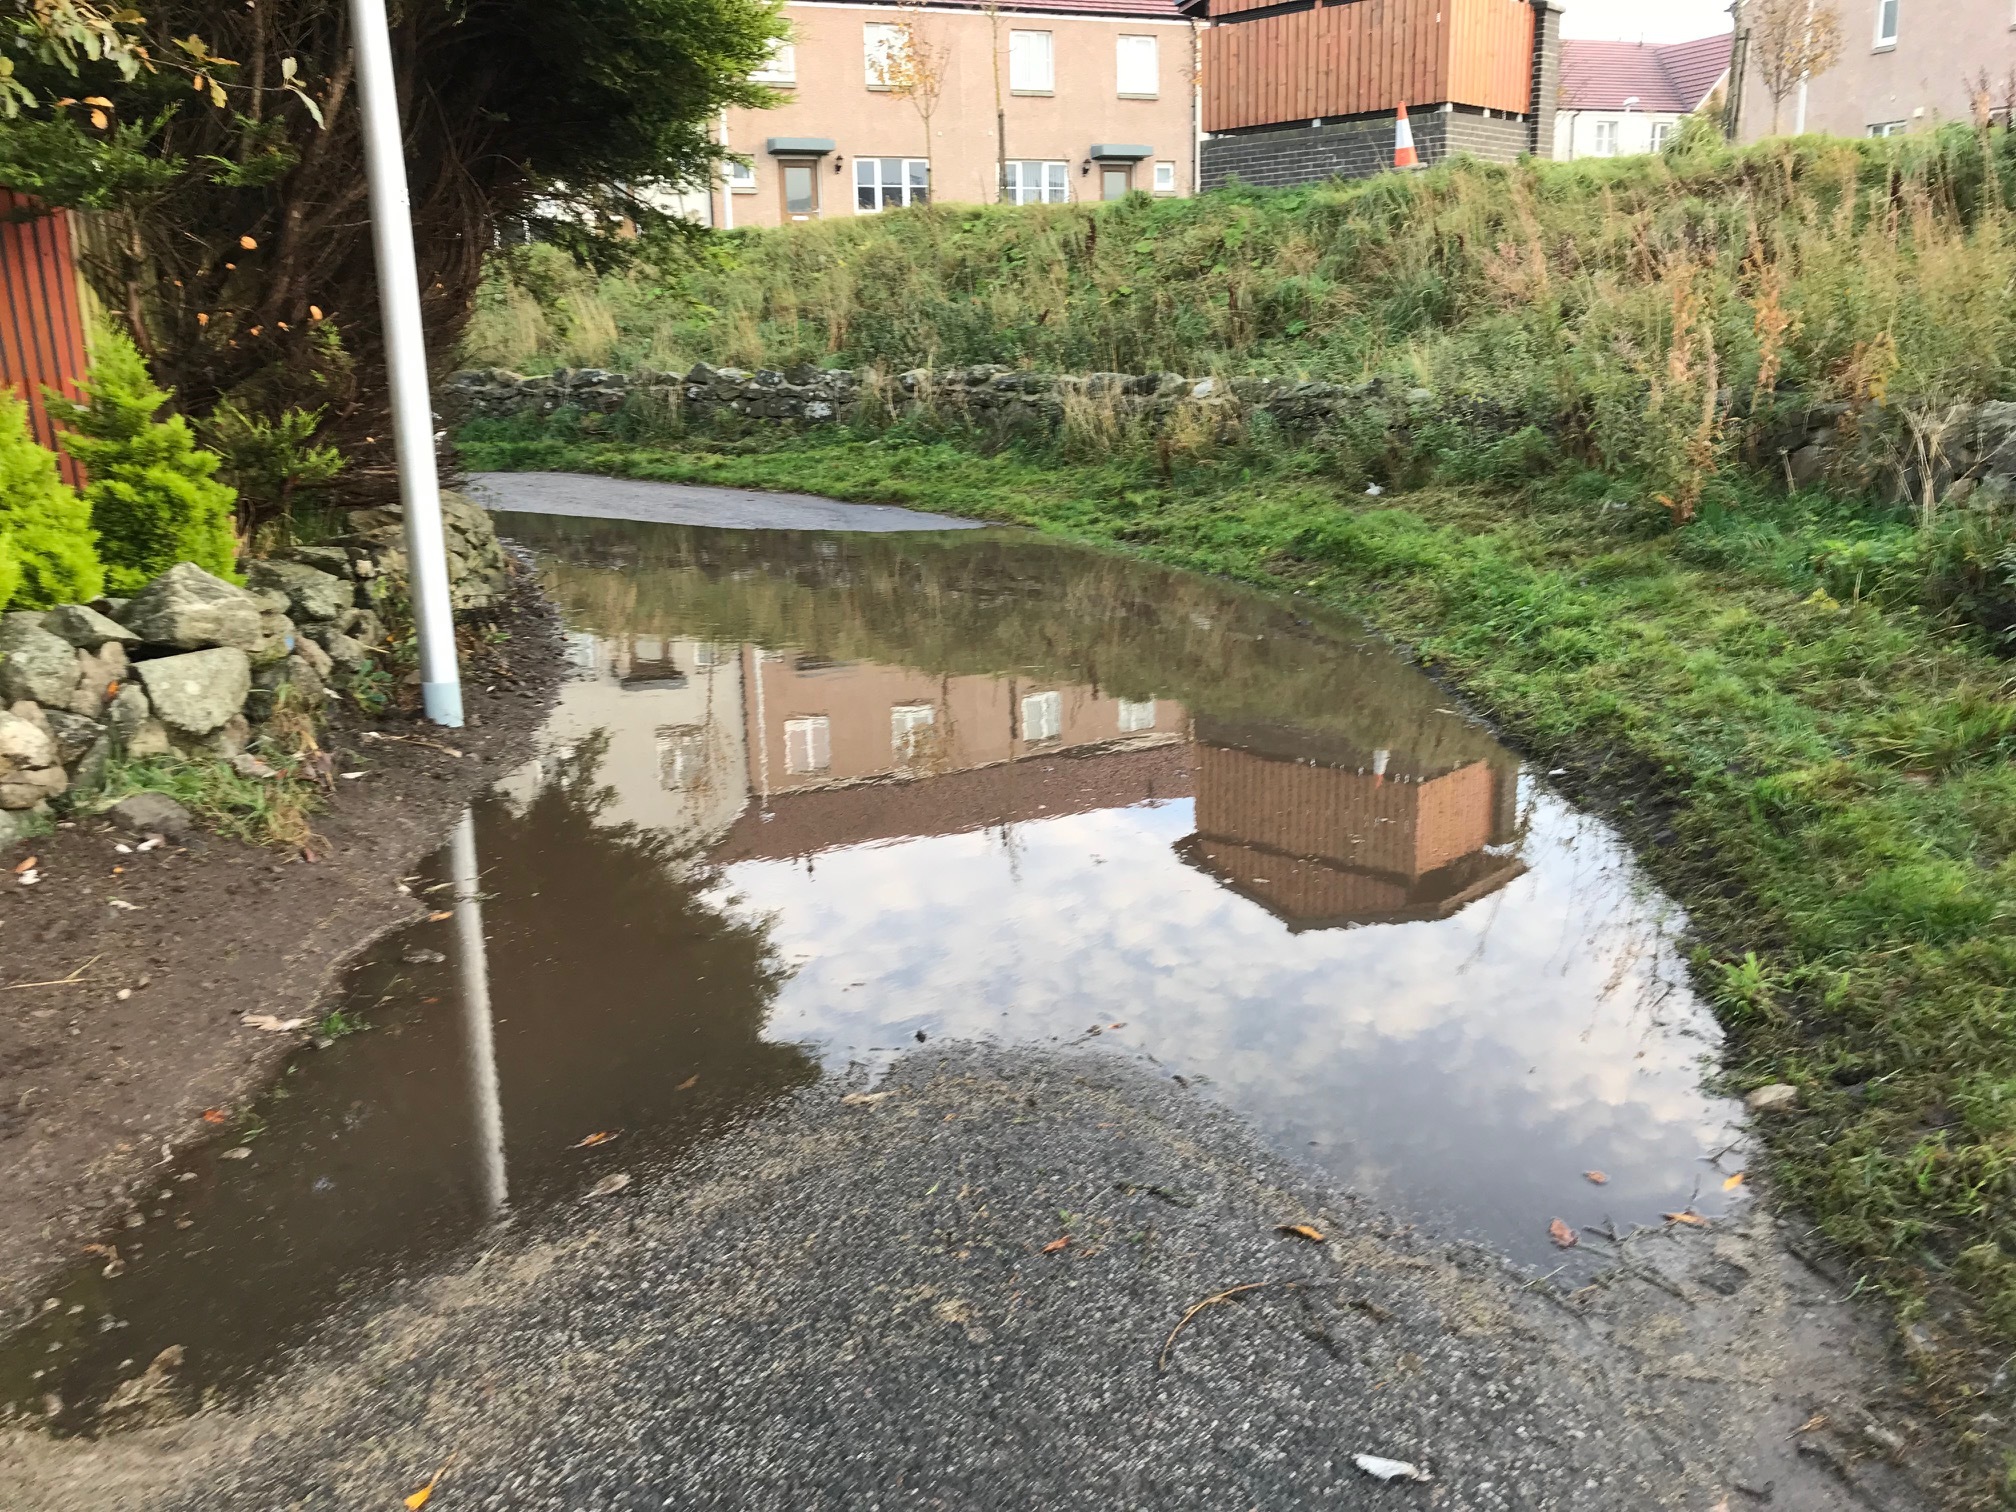 Flooding on South Loirston Road in Cove